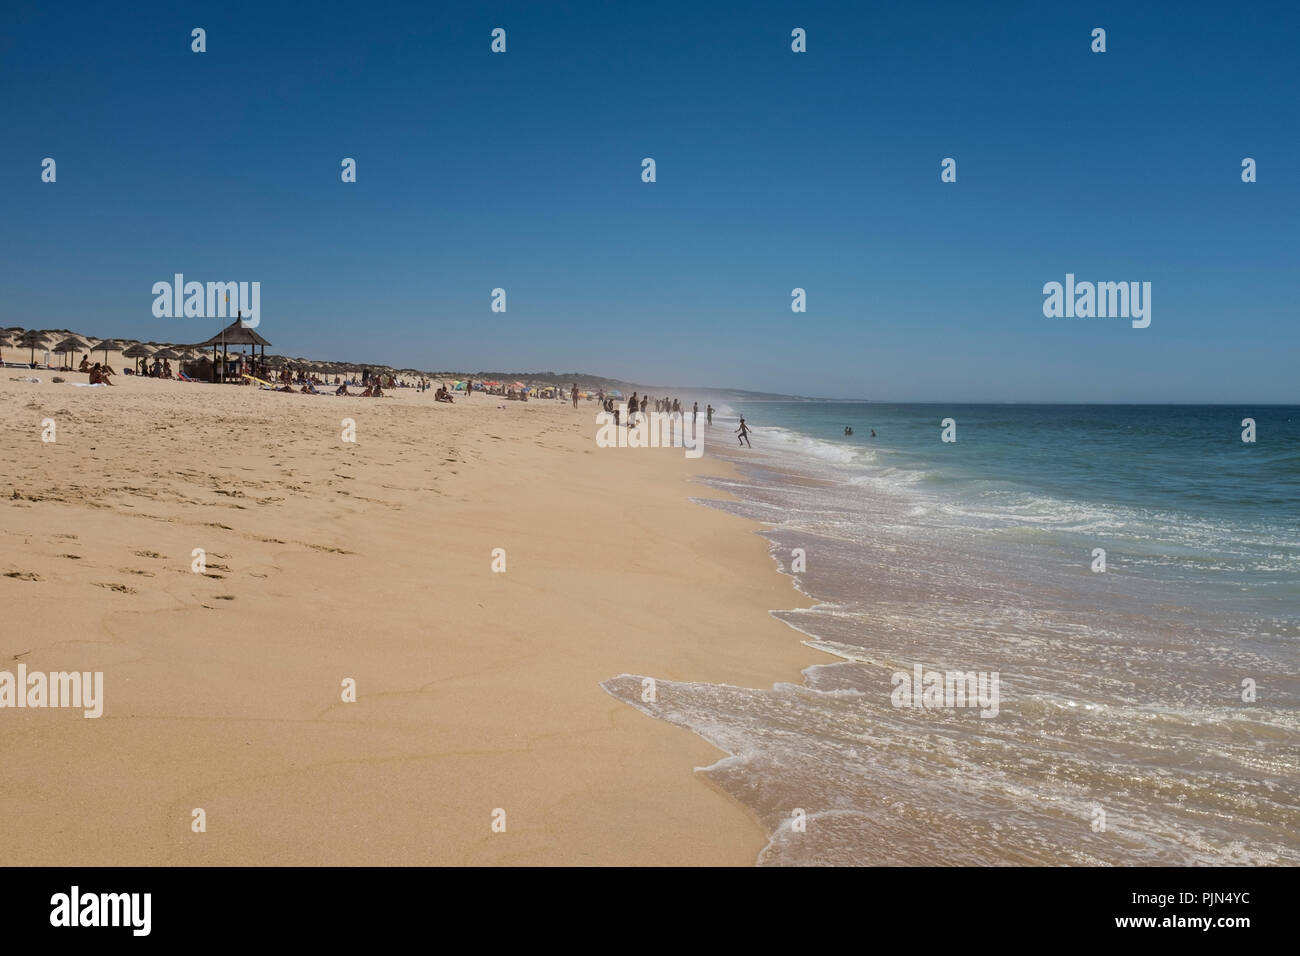 People on the beach at Praia do Pego, also known as Pego Beach, Carvalhal, Portugal, during summer Stock Photo